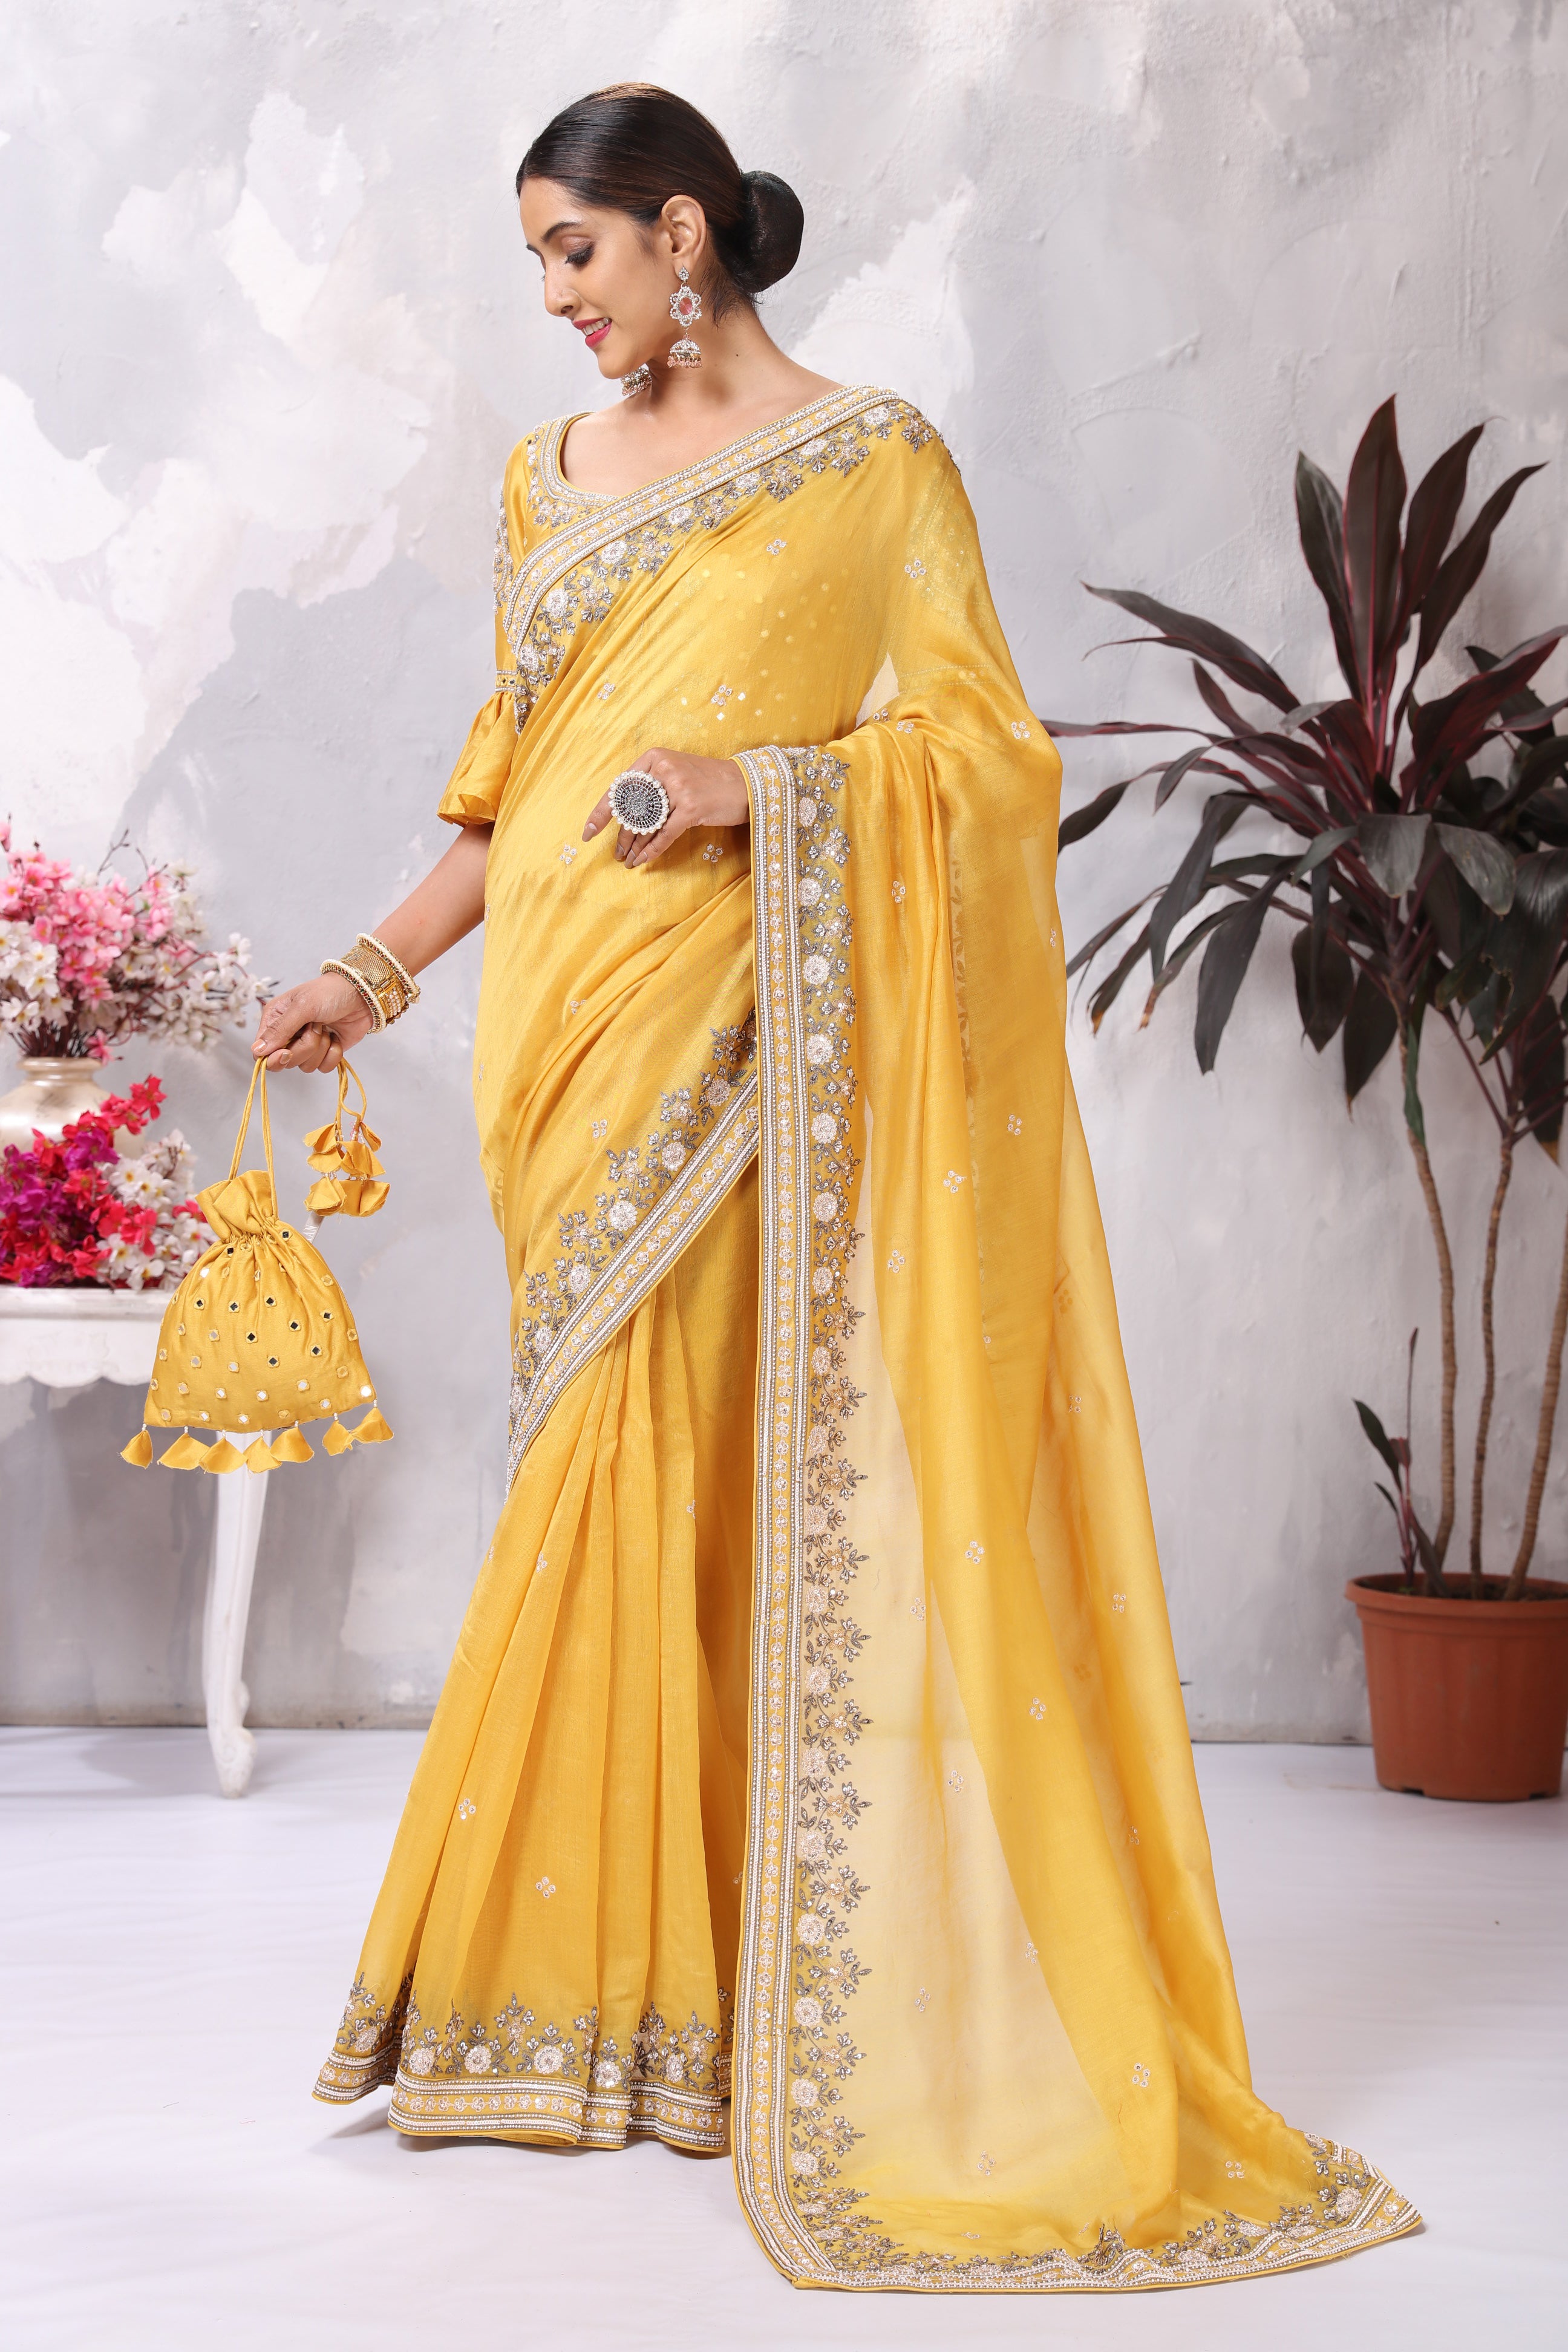 Buy mustard yellow saree online in USA with embroidered border and matching blouse. Flaunt Indian style at parties and weddings in beautiful designer sarees, embroidered sarees, silk sarees, handloom sarees from Pure Elegance Indian fashion store in USA.-full view